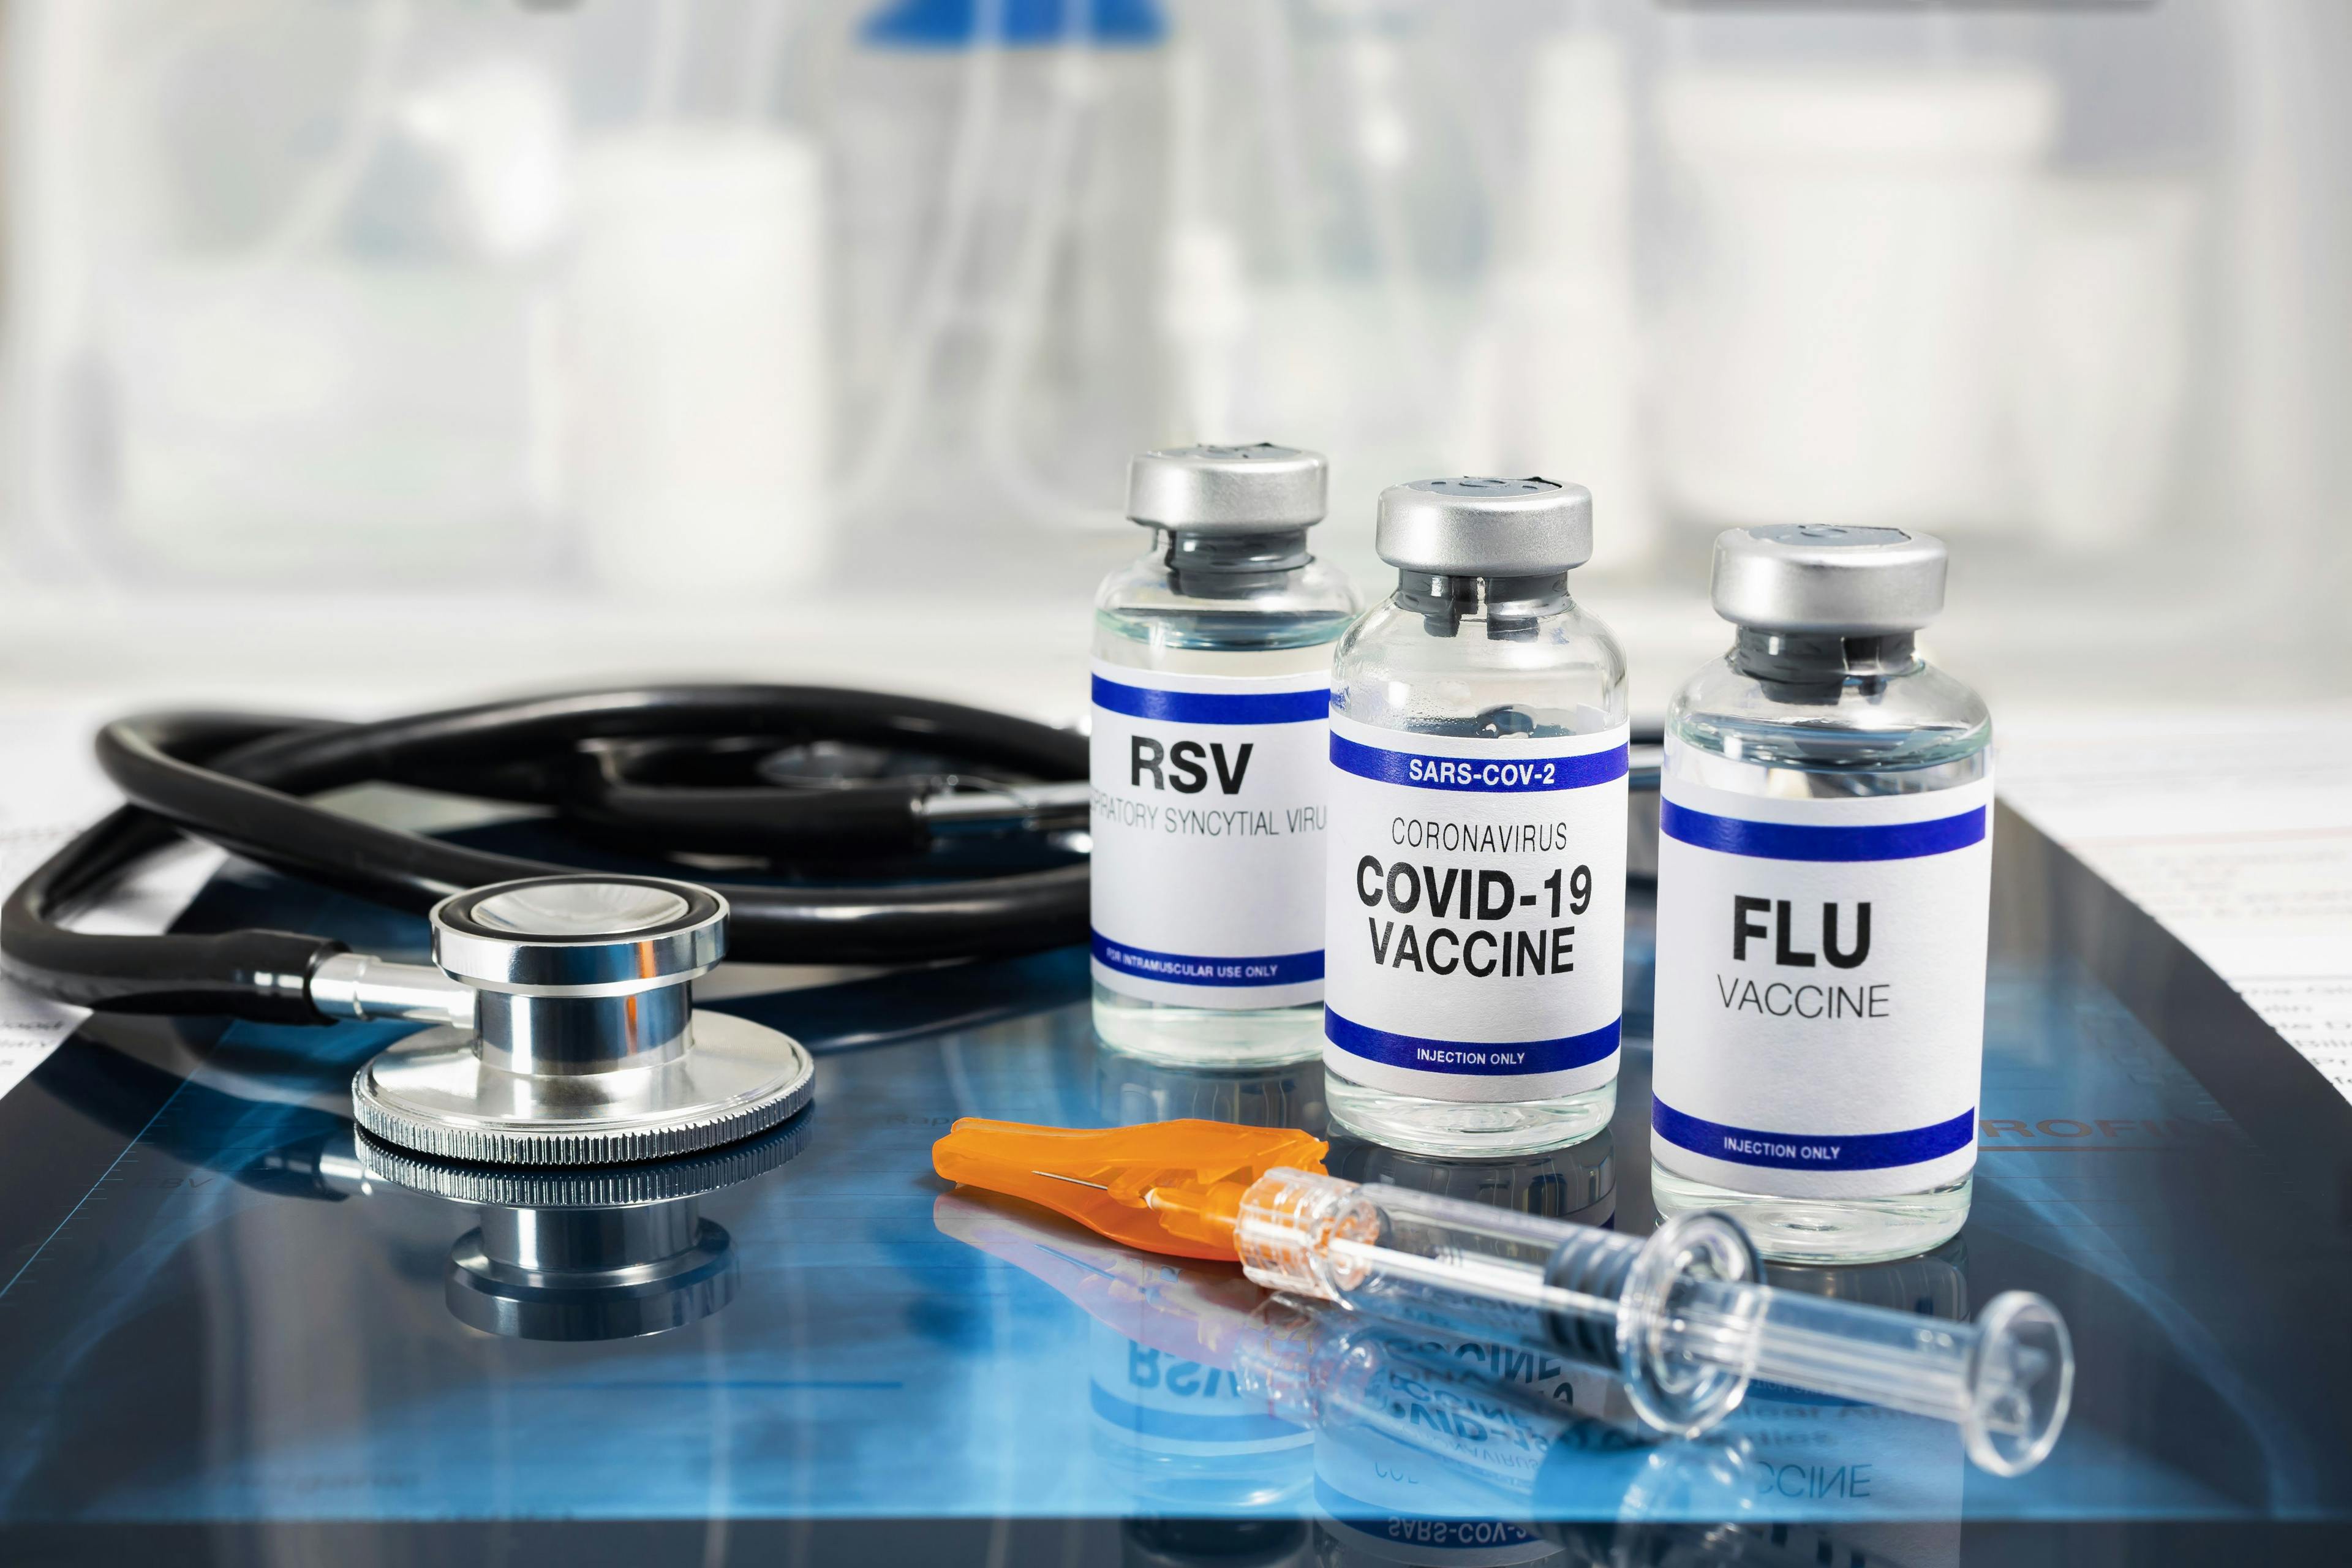 Bottles of vaccine for Influenza Virus, Respiratory Syncytial virus and Covid-19 for vaccination. Flu, RSV and Sars-cov-2 Coronavirus vaccine vials over Radiography pulmonar with stethoscope - Image credit: angellodeco | stock.adobe.com